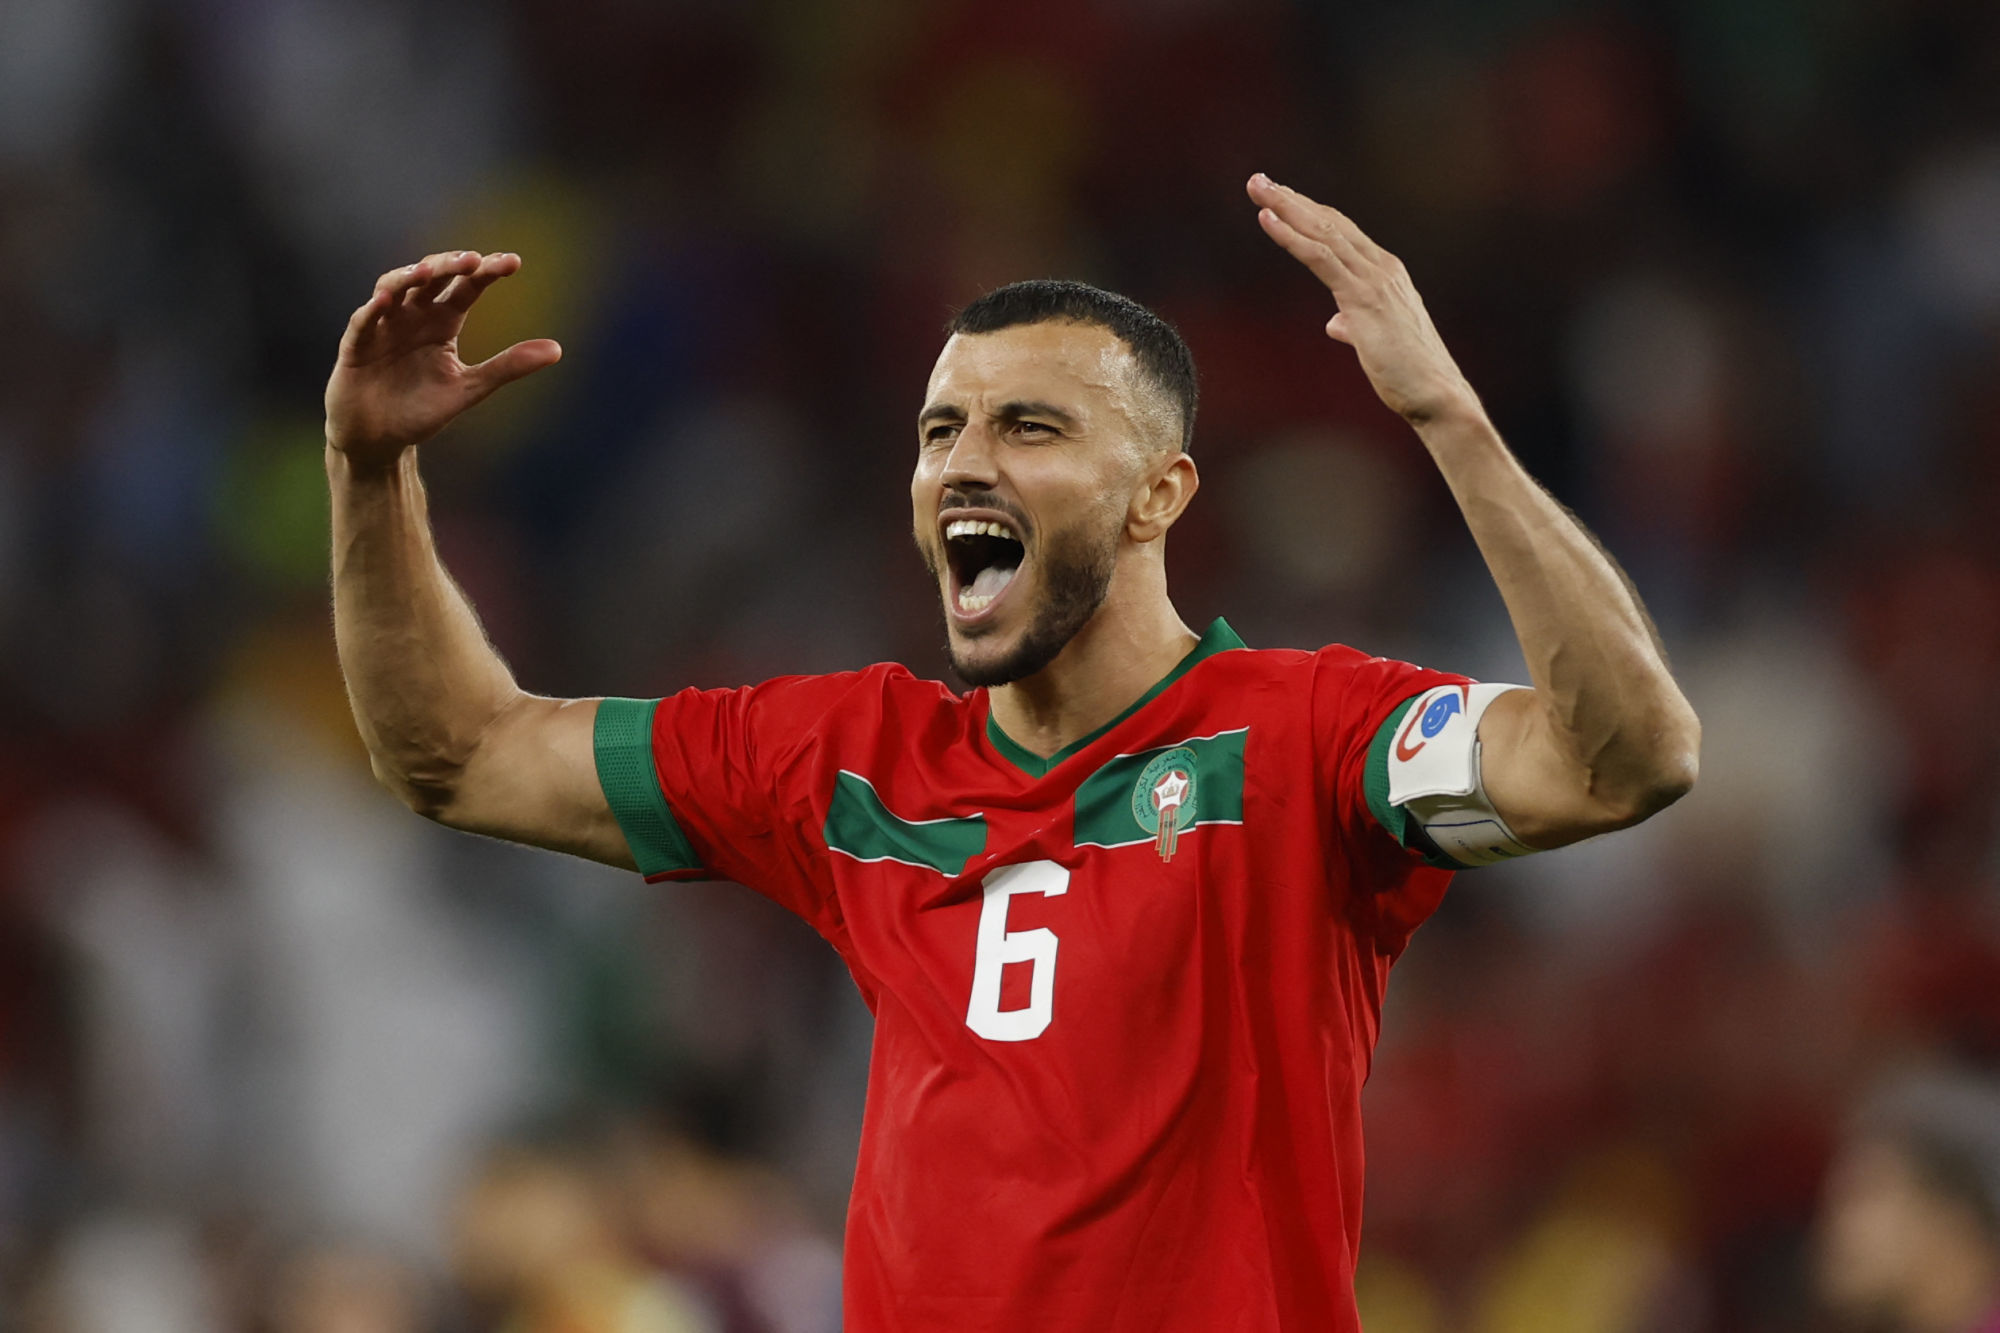 Romain Saiss of Morocco reacts during the penalty shouout during the FIFA World Cup round 16 soccer match between Morocco and Spain at Education City stadium in Rayyan, Qatar, 06 December 2022. Efe/ABACAPRESS.COM// Alberto Estevez - Photo by Icon sport